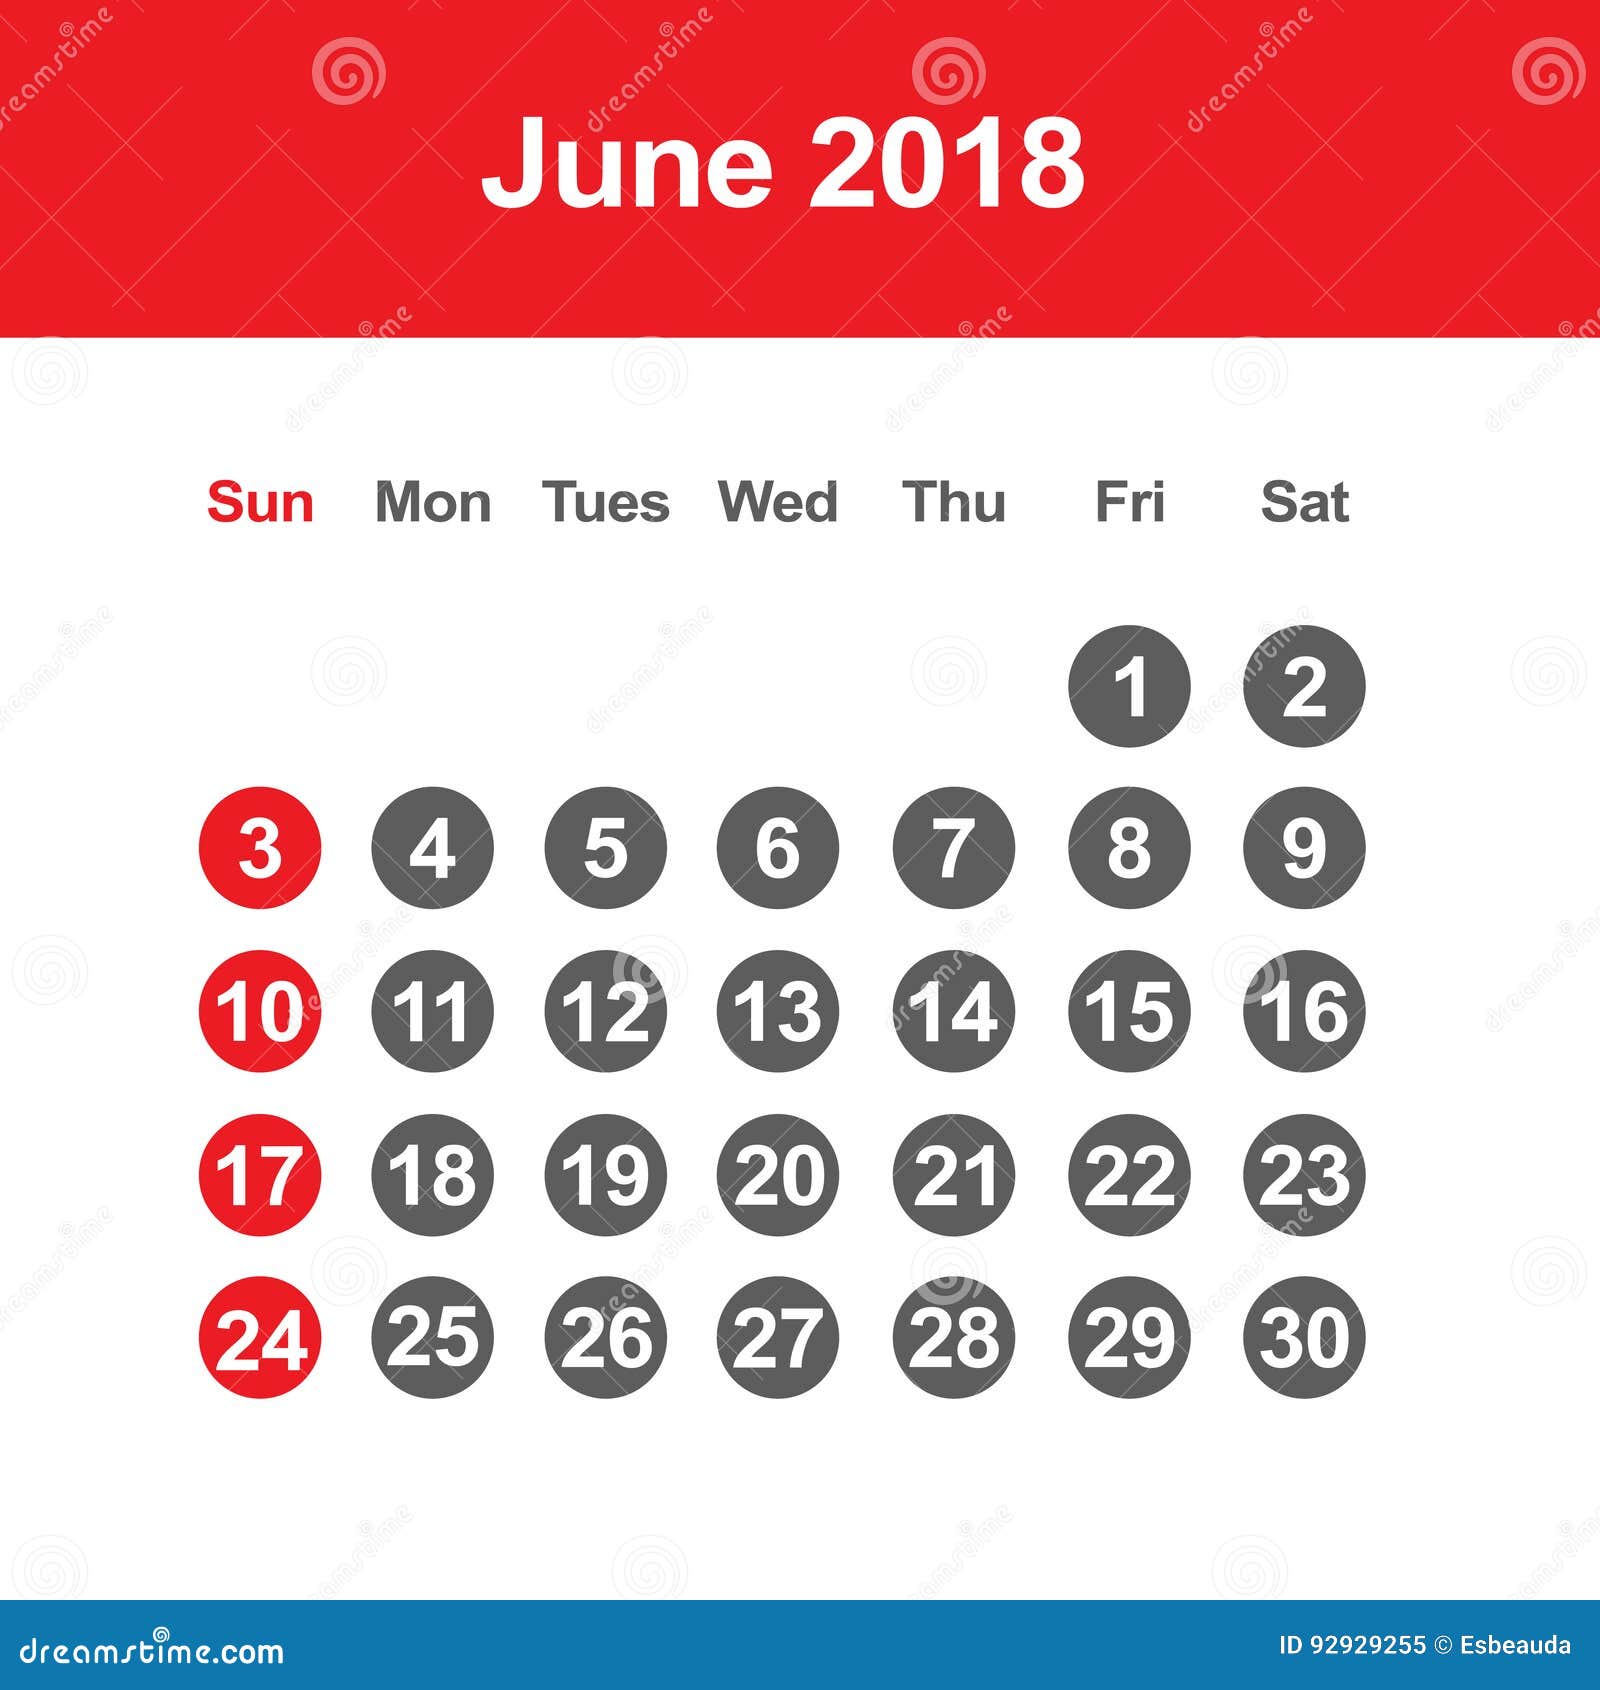 calendar-june-2018-uk-with-excel-word-and-pdf-templates